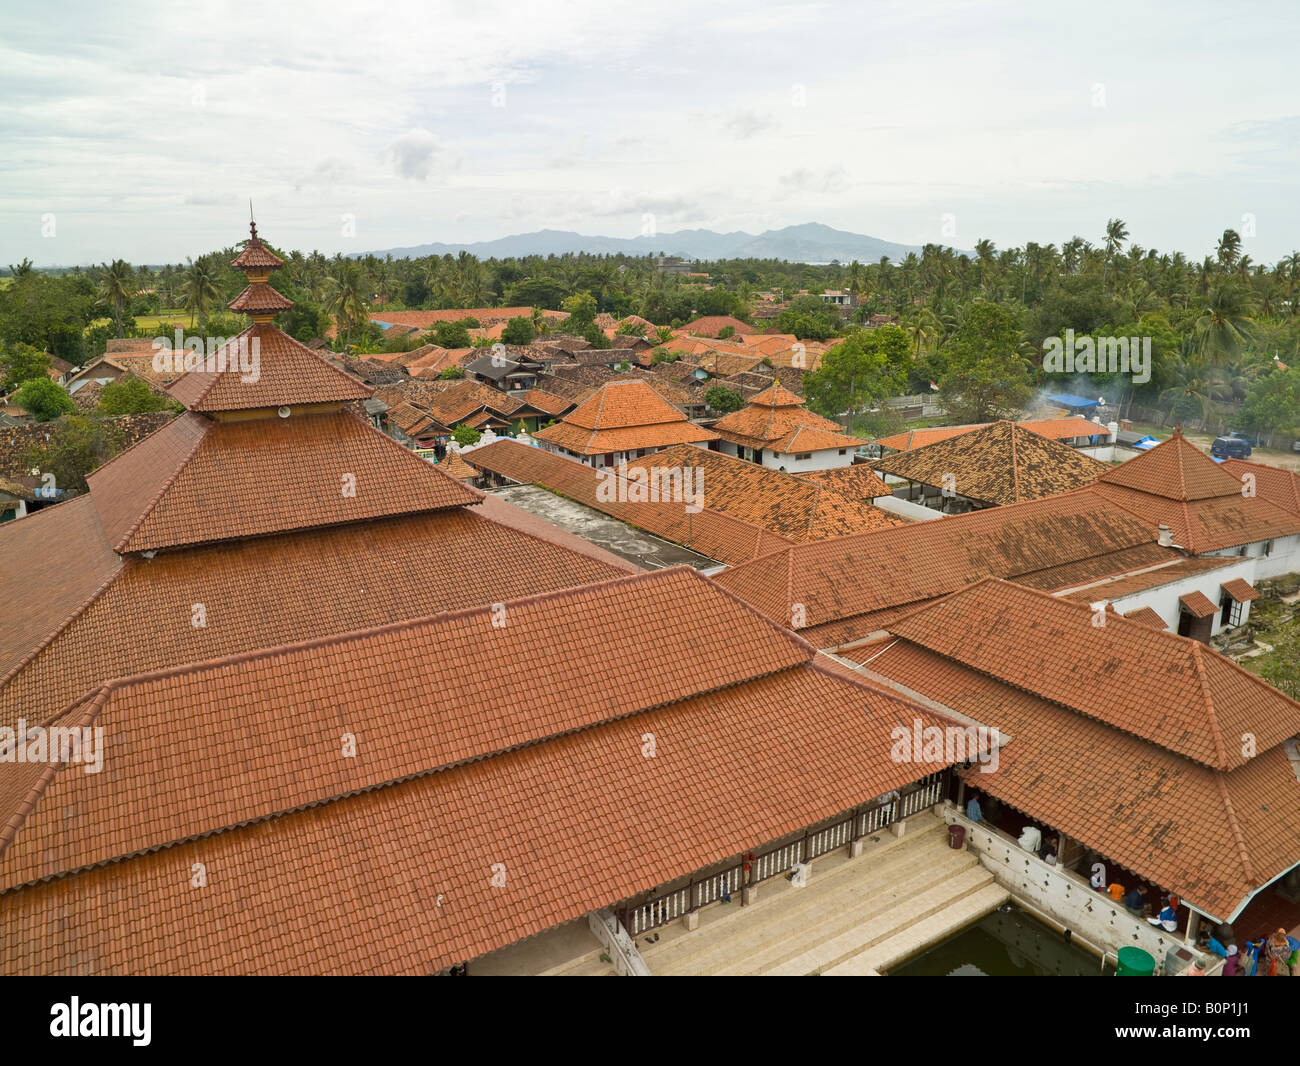 roofs of Great mosque and houses, Banten, Java, Indonesia Stock Photo